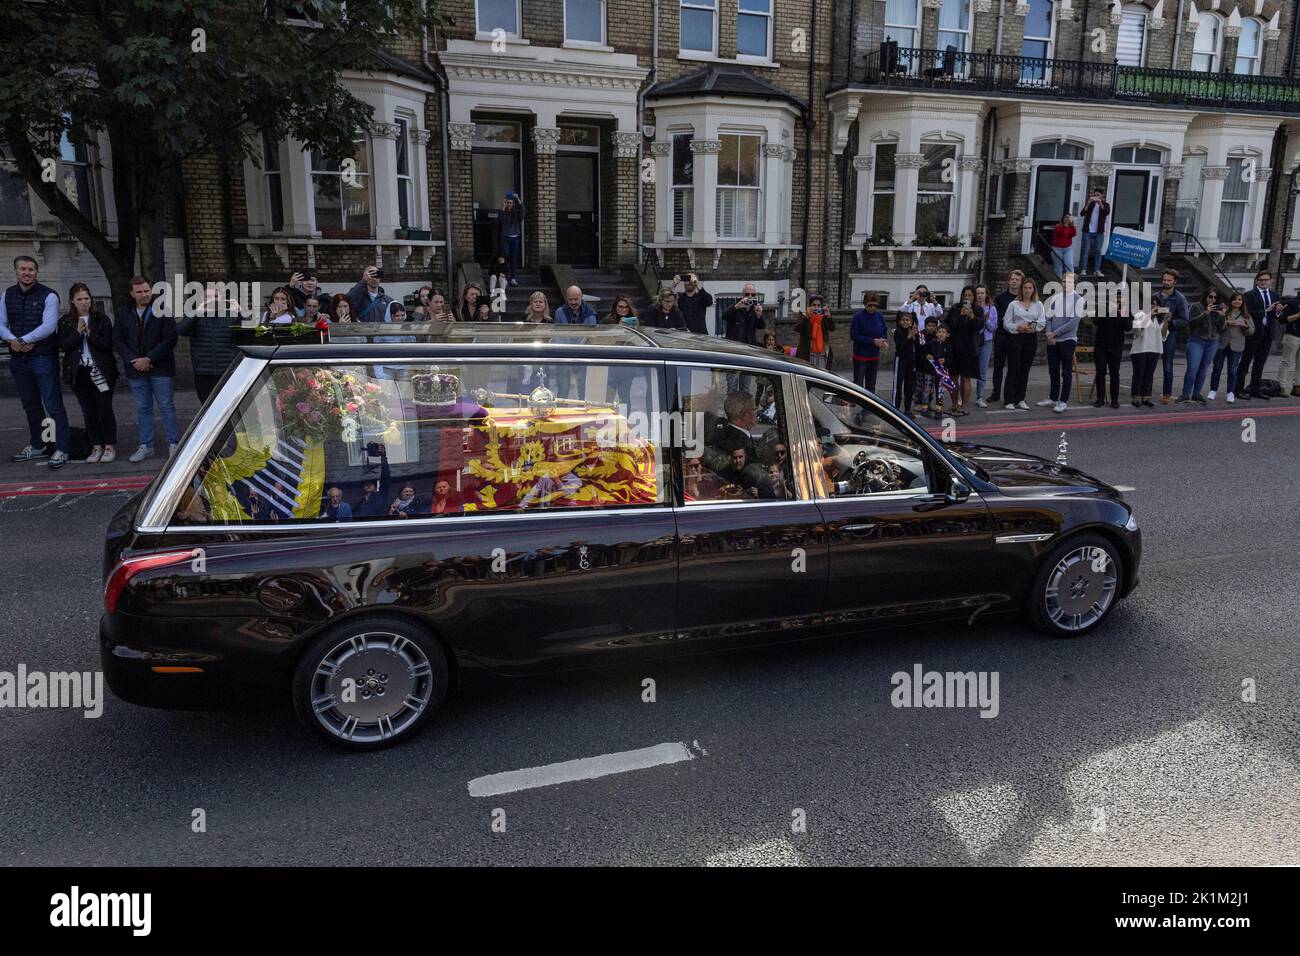 Britain's Queen Elizabeth's coffin is transported, on the day of her state funeral and burial, in London, Britain, September 19, 2022. REUTERS/Carlos Barria Stock Photo